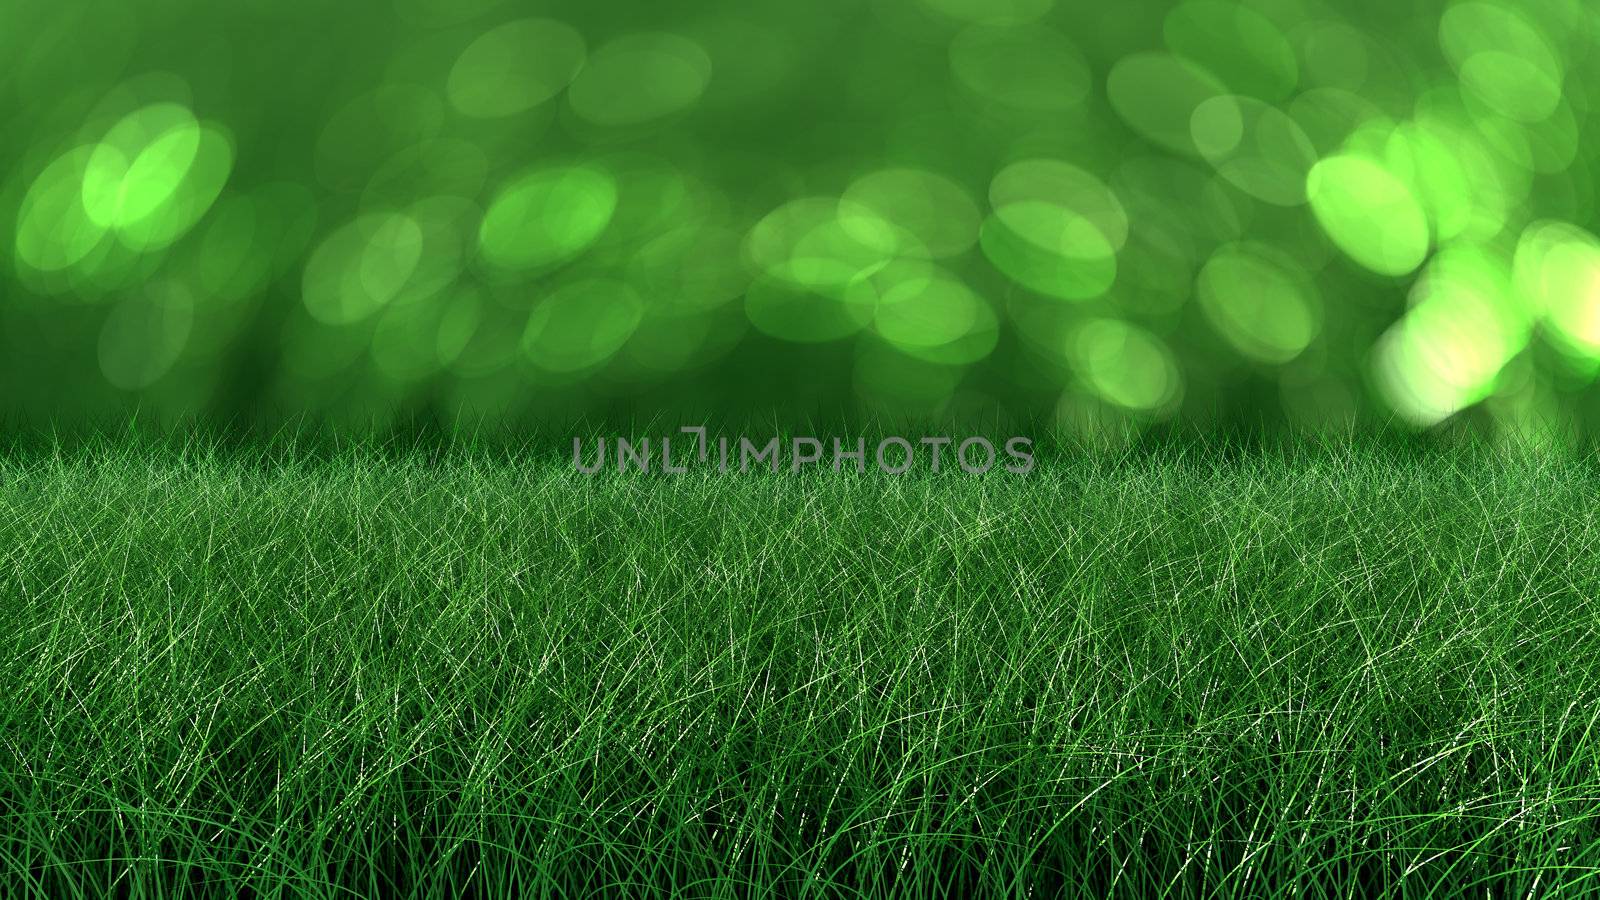 flowers and grass seamless texture for backgrounds